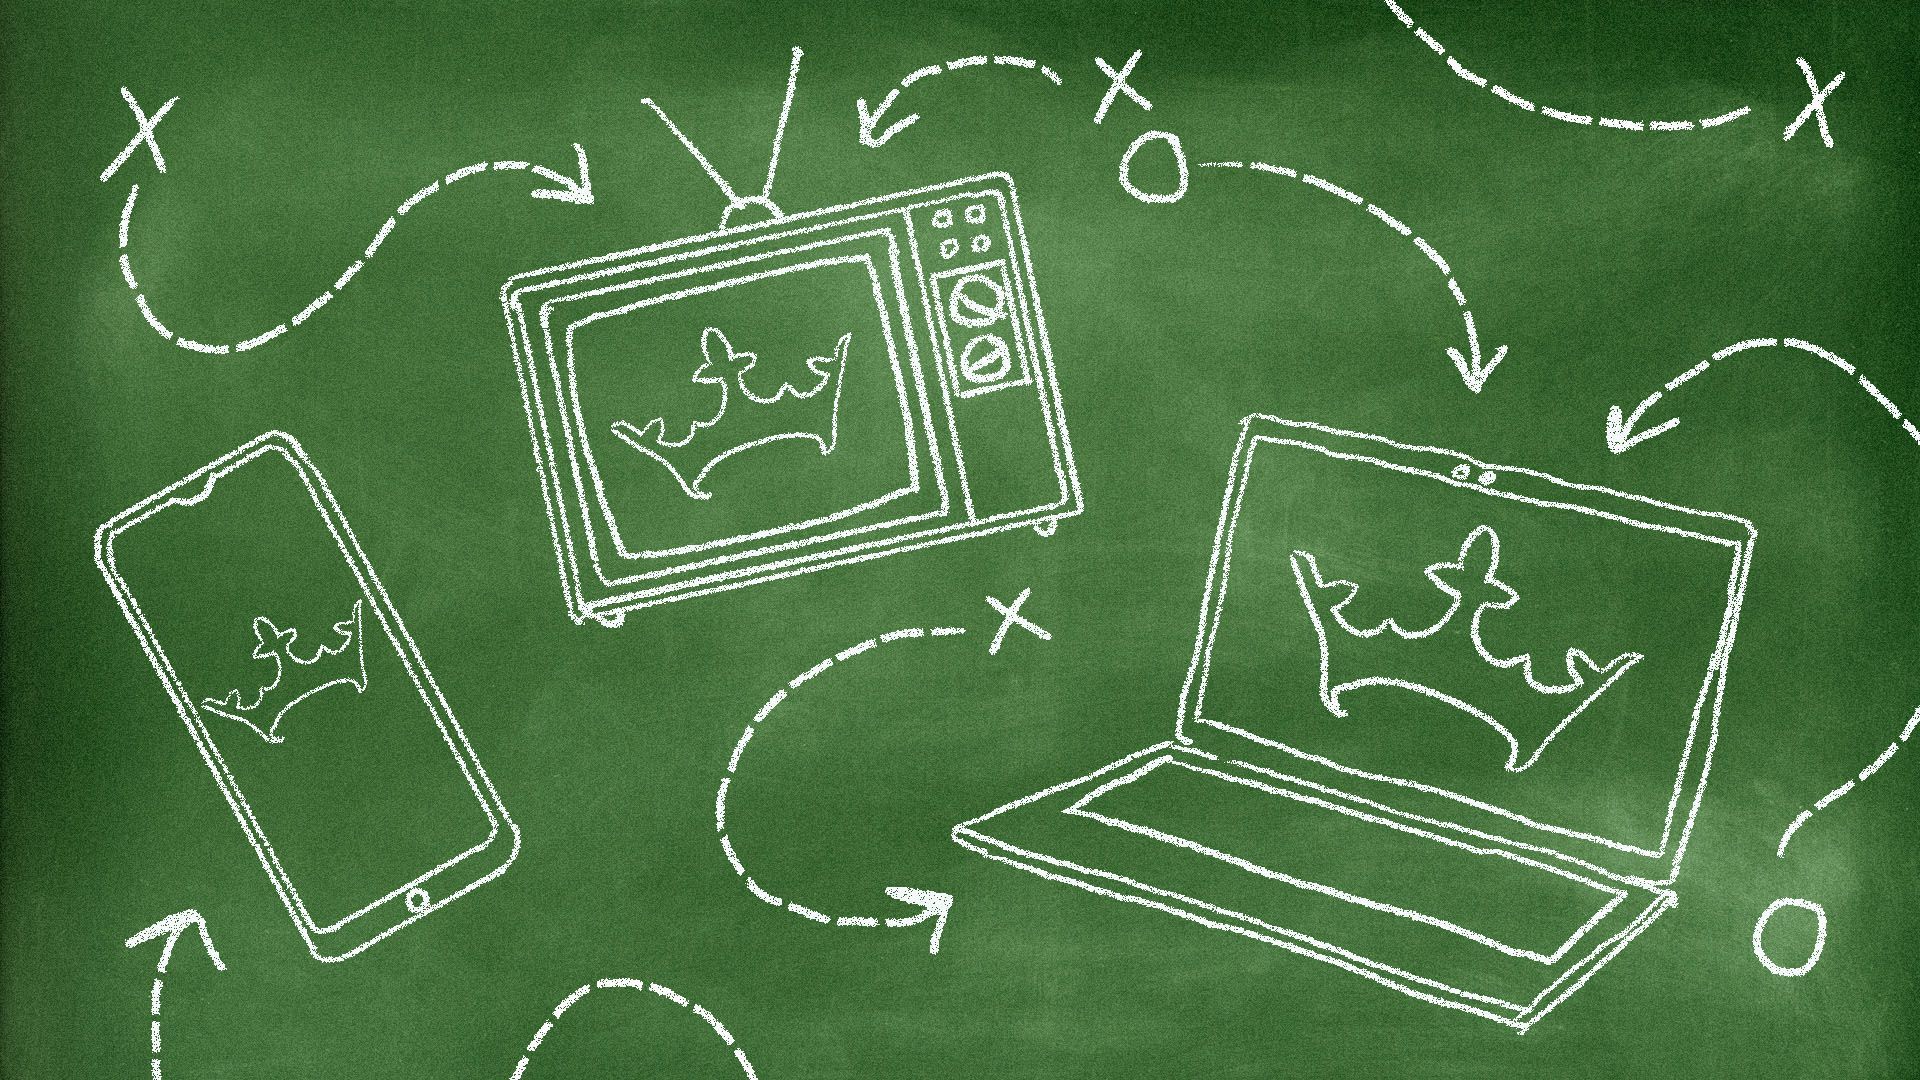 Illustration of a chalkboard with drawings of a cellphone, television, and computer with Draftking logos and sports plays